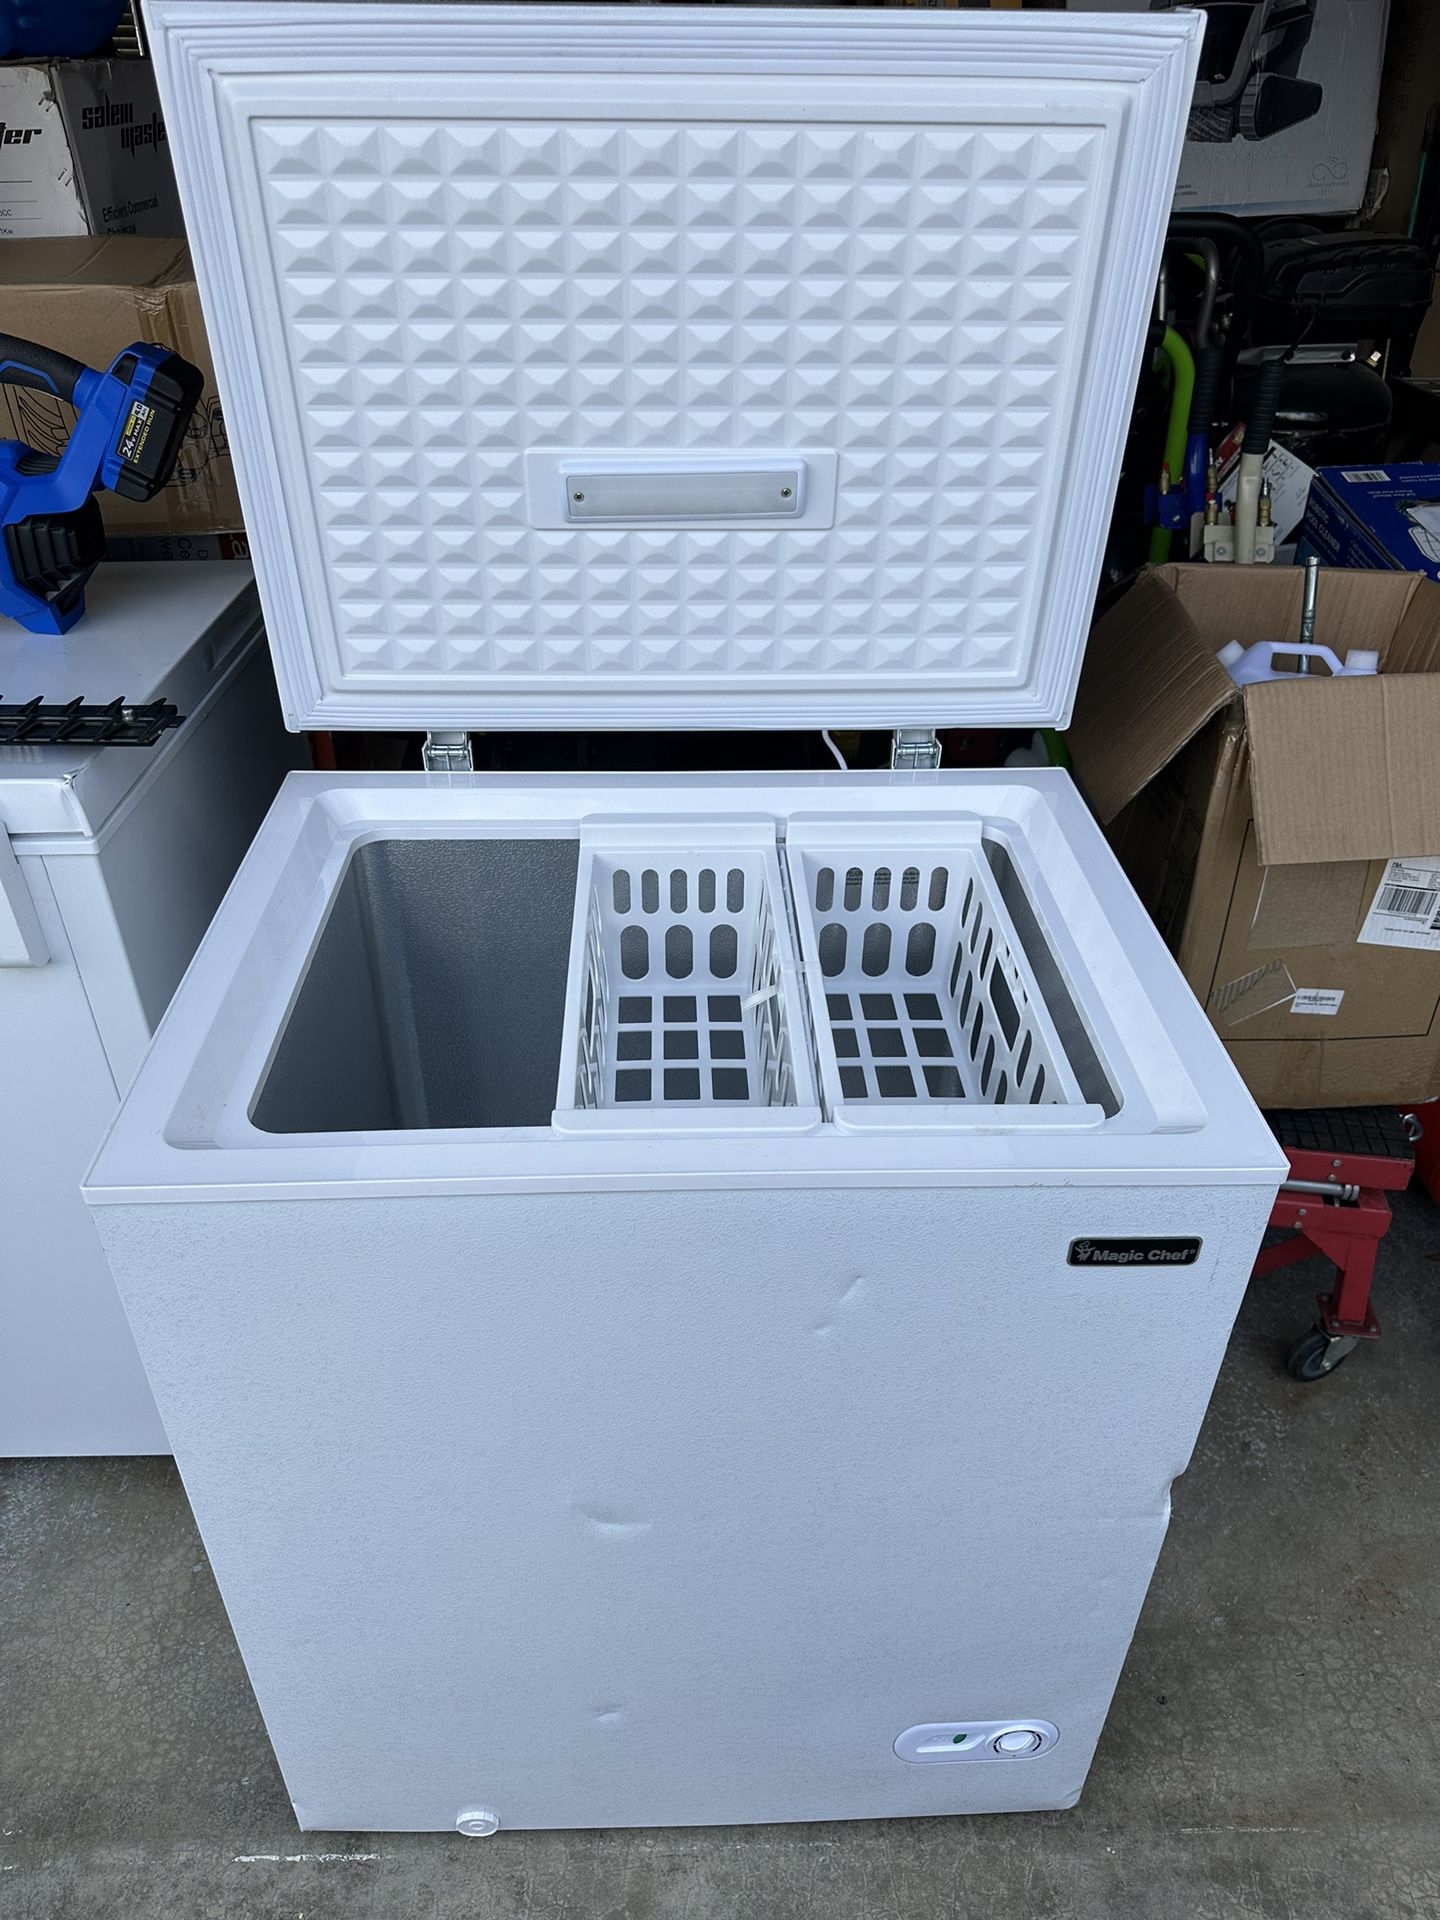 New magic chef 5.0 chest freezer. Has small dents, please look at pictures. Interior of freezer is perfect. Try before you buy. Pick up only. 